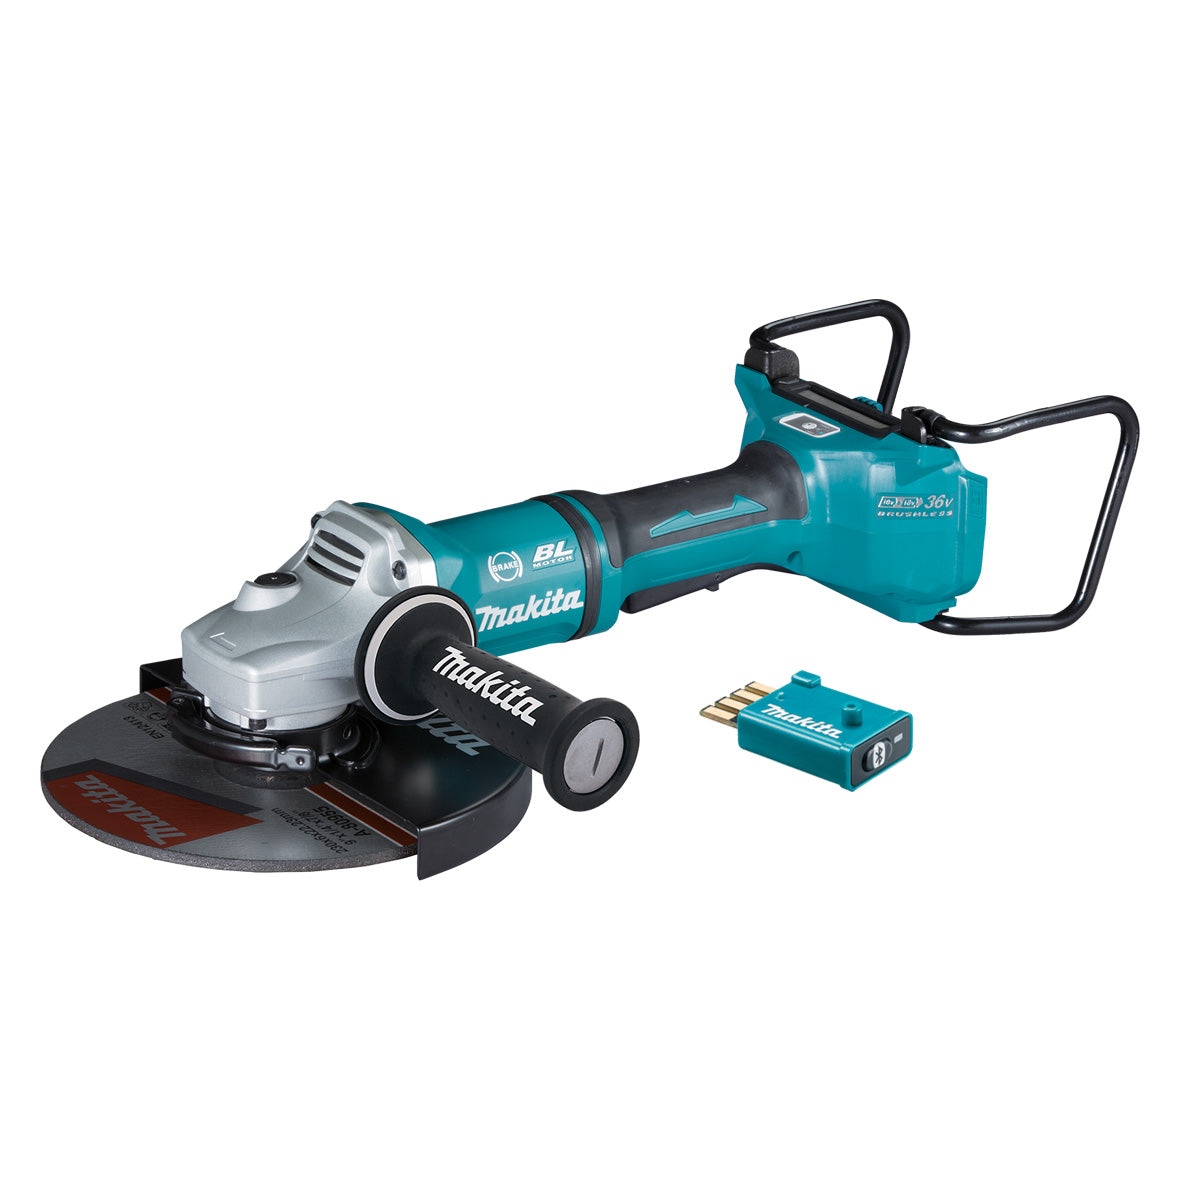 18Vx2 230mm (9") Brushless AWS Angle Grinder Bare (Tool Only) DGA901ZKU1 by Makita